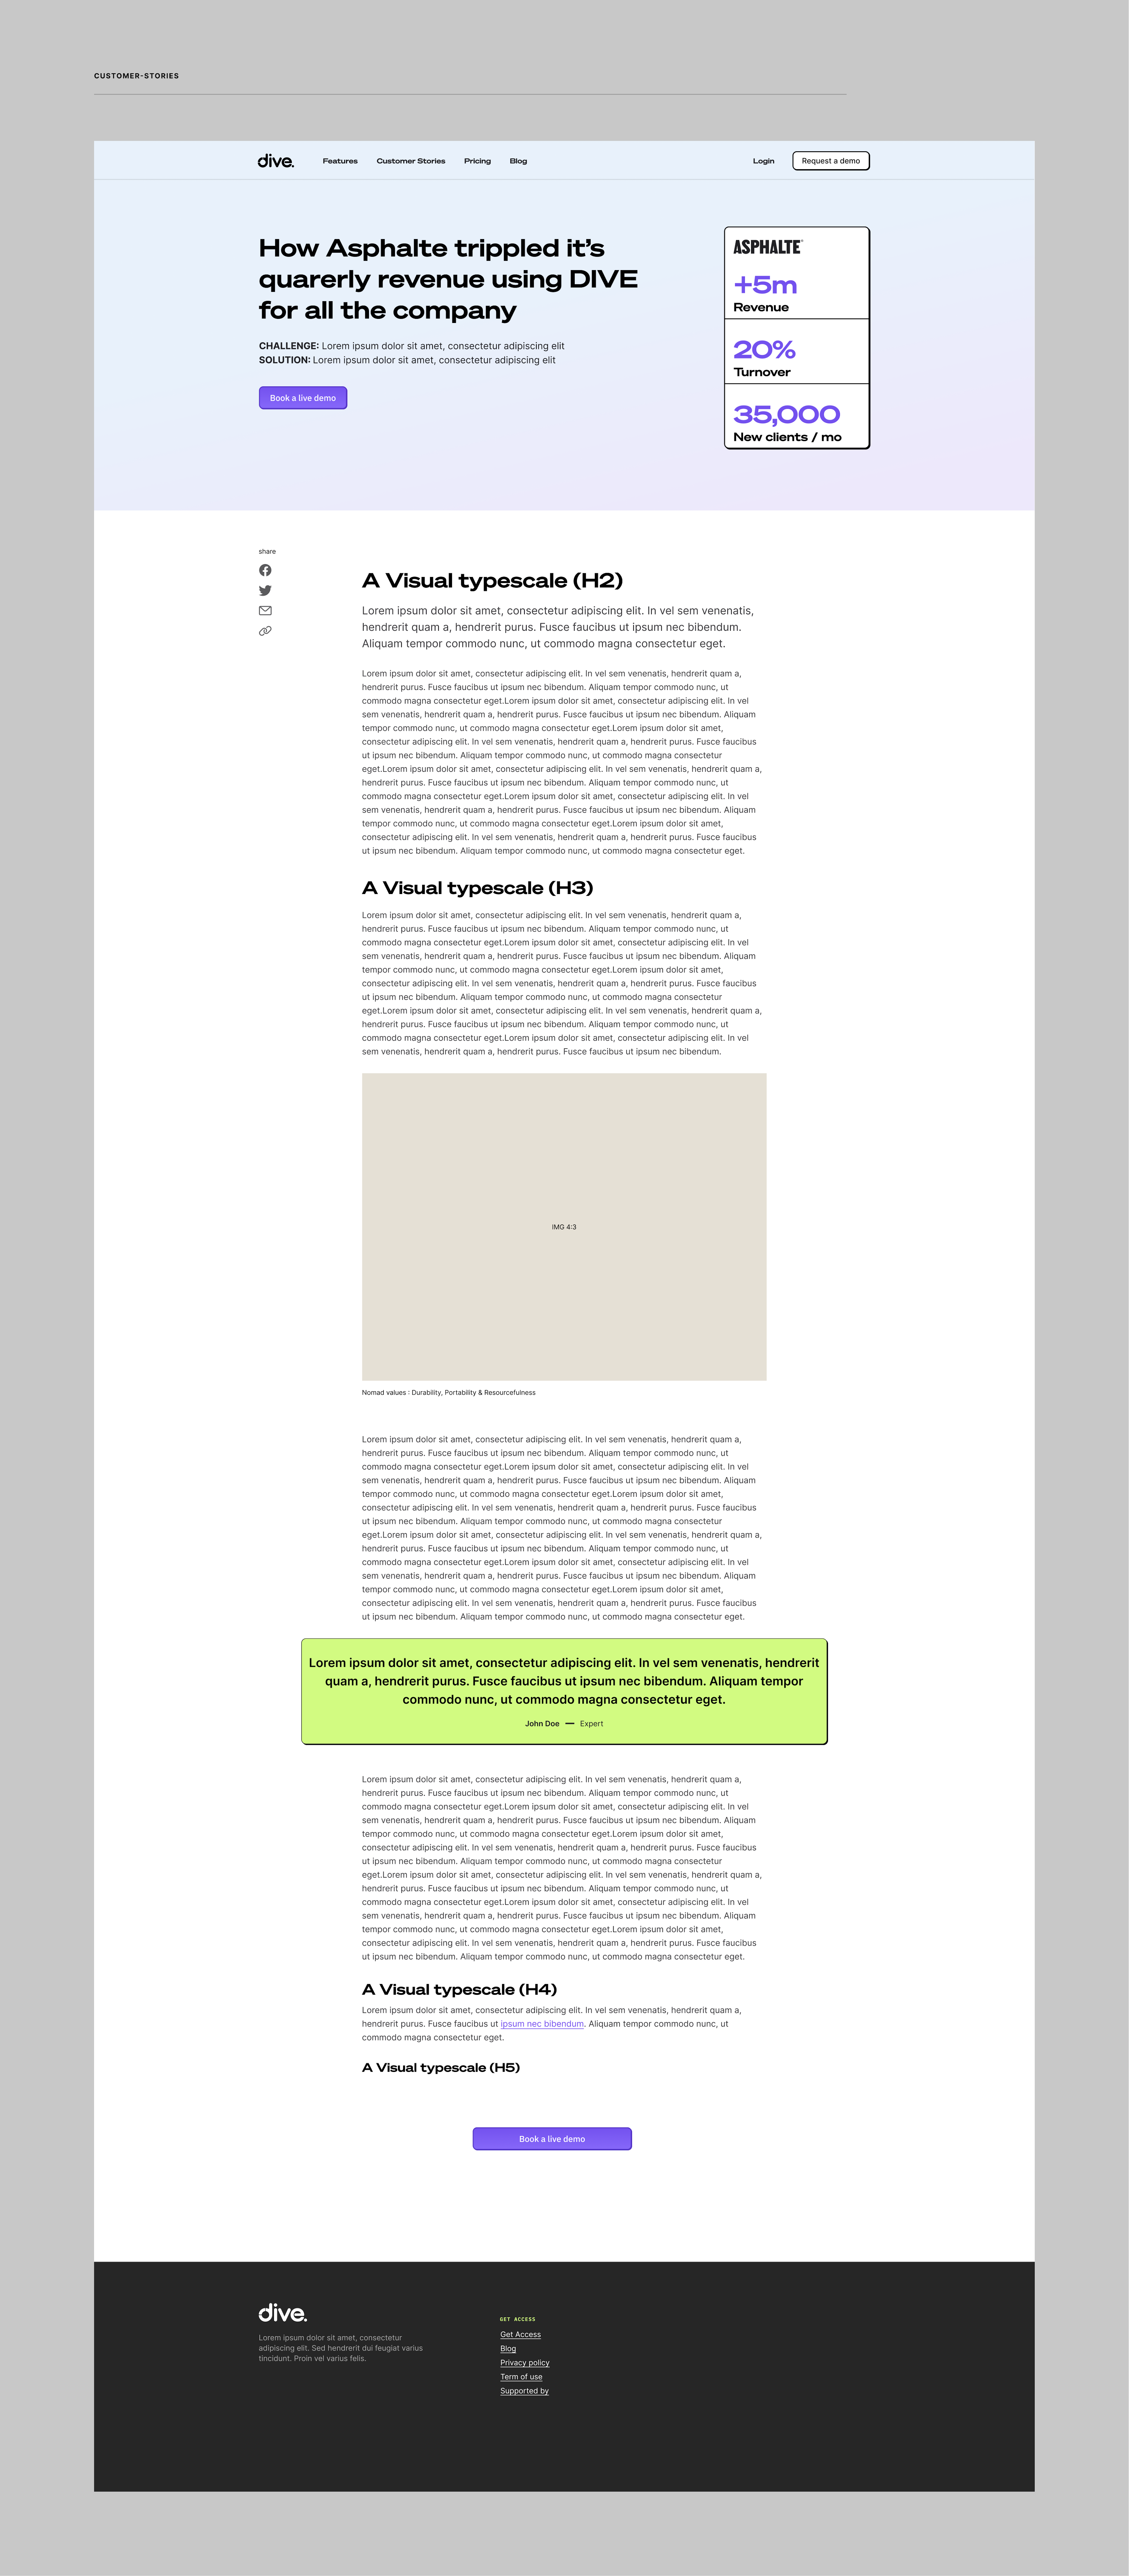 PREVIEW_4 Case Study Page